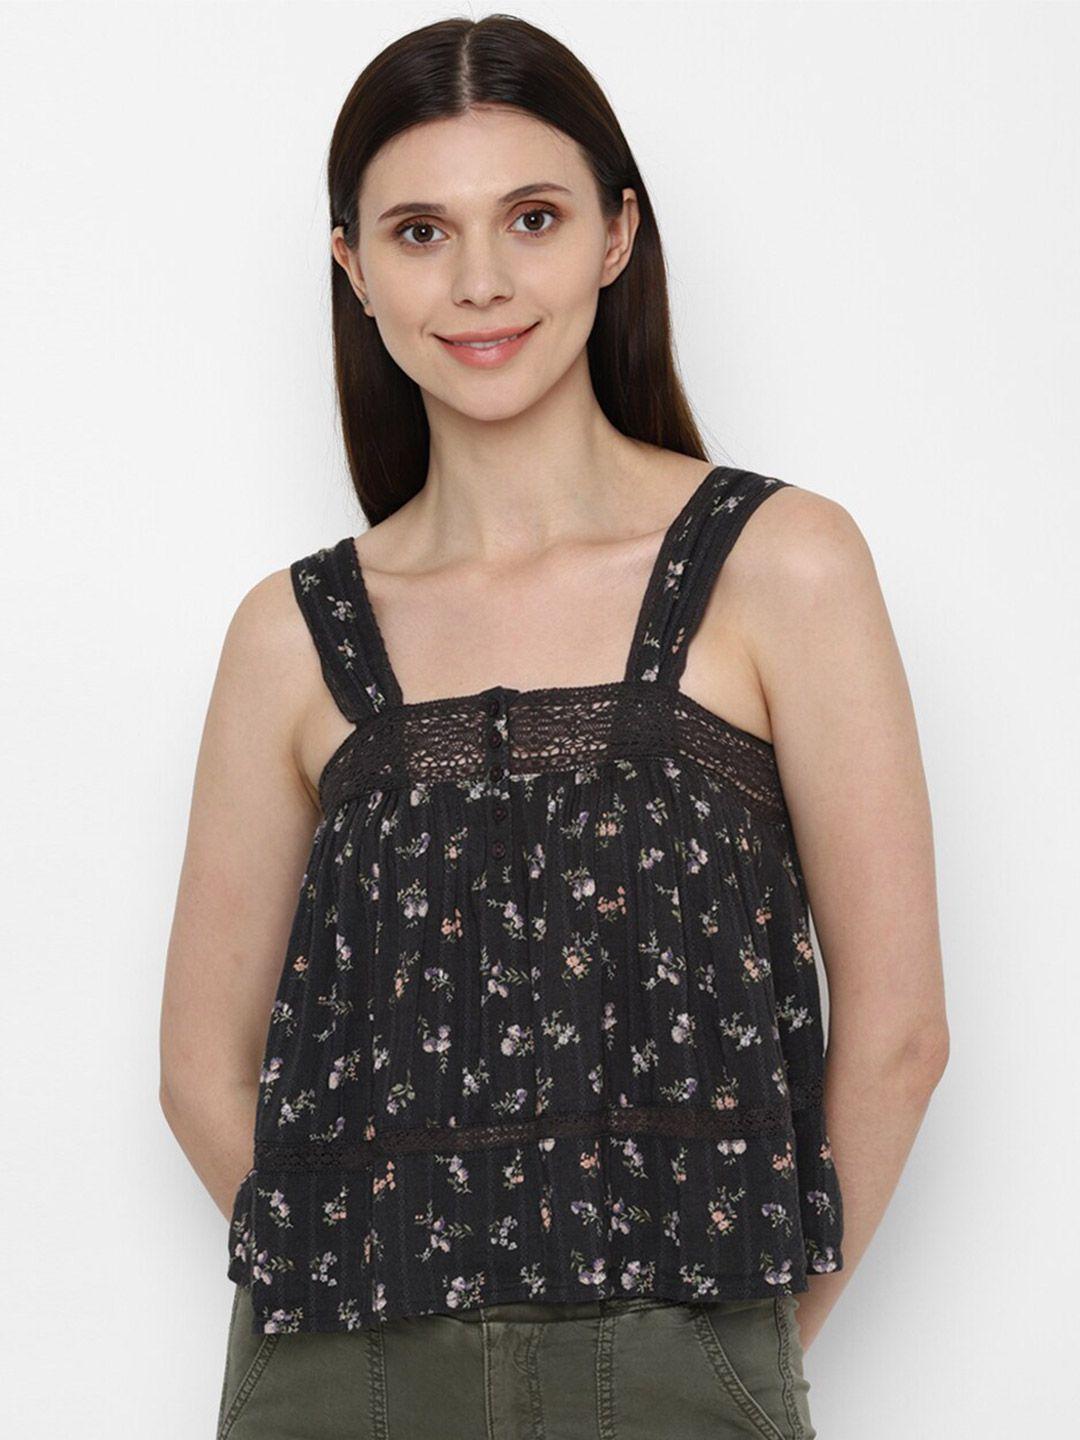 american-eagle-outfitters-women-black-floral-print-shoulder-straps-top